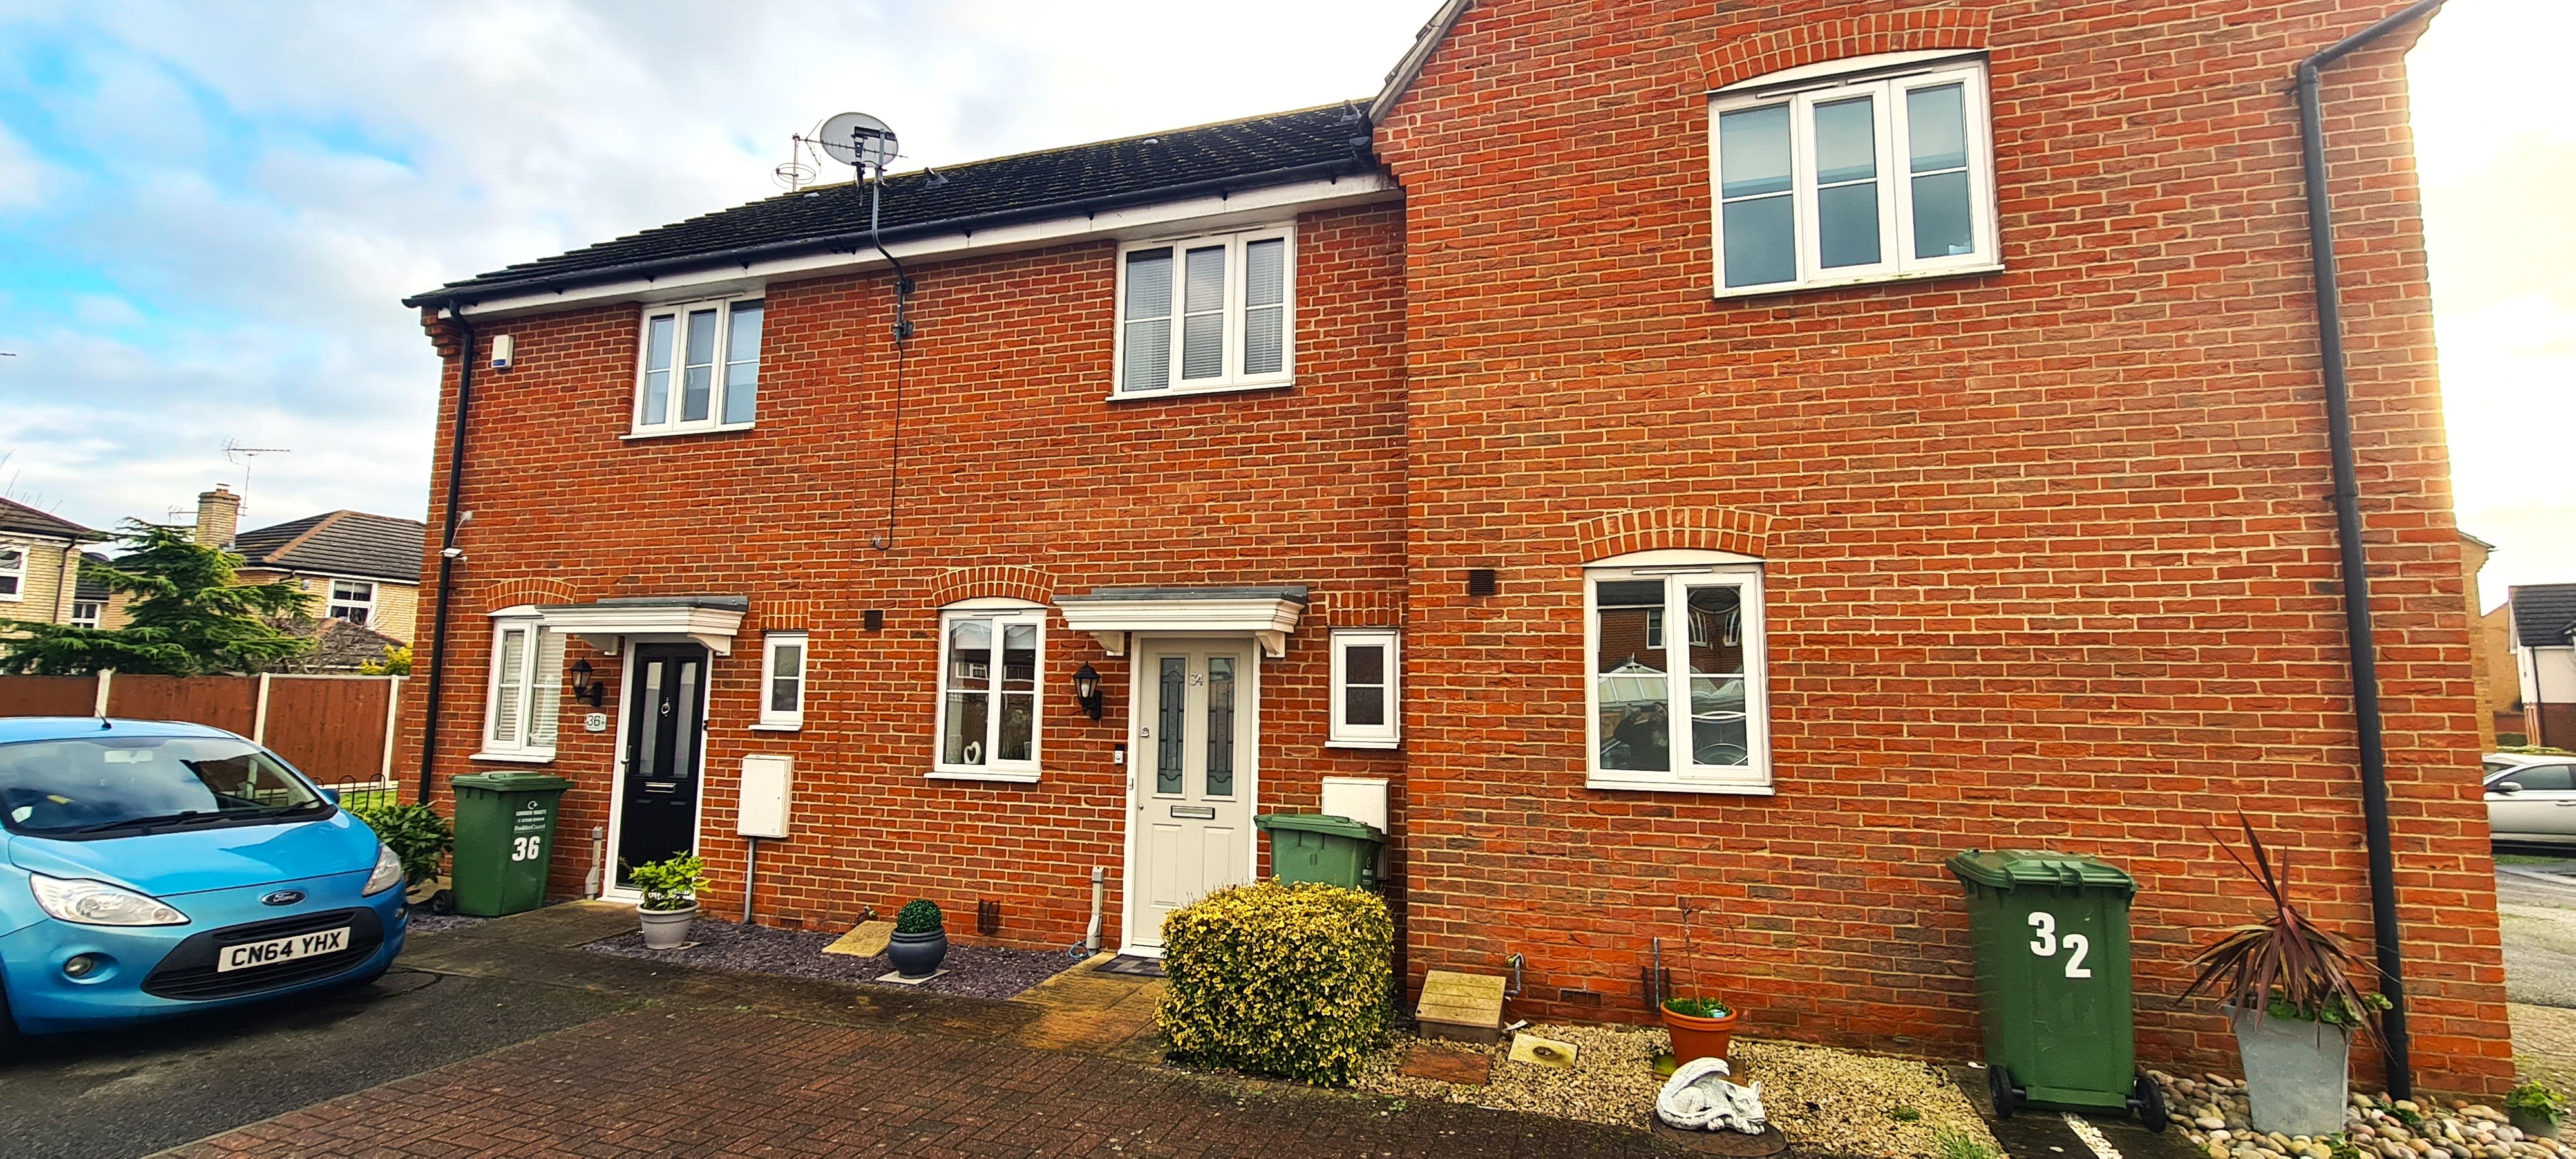 2 bed terraced house to rent in Barbour Green, Wickford, SS12